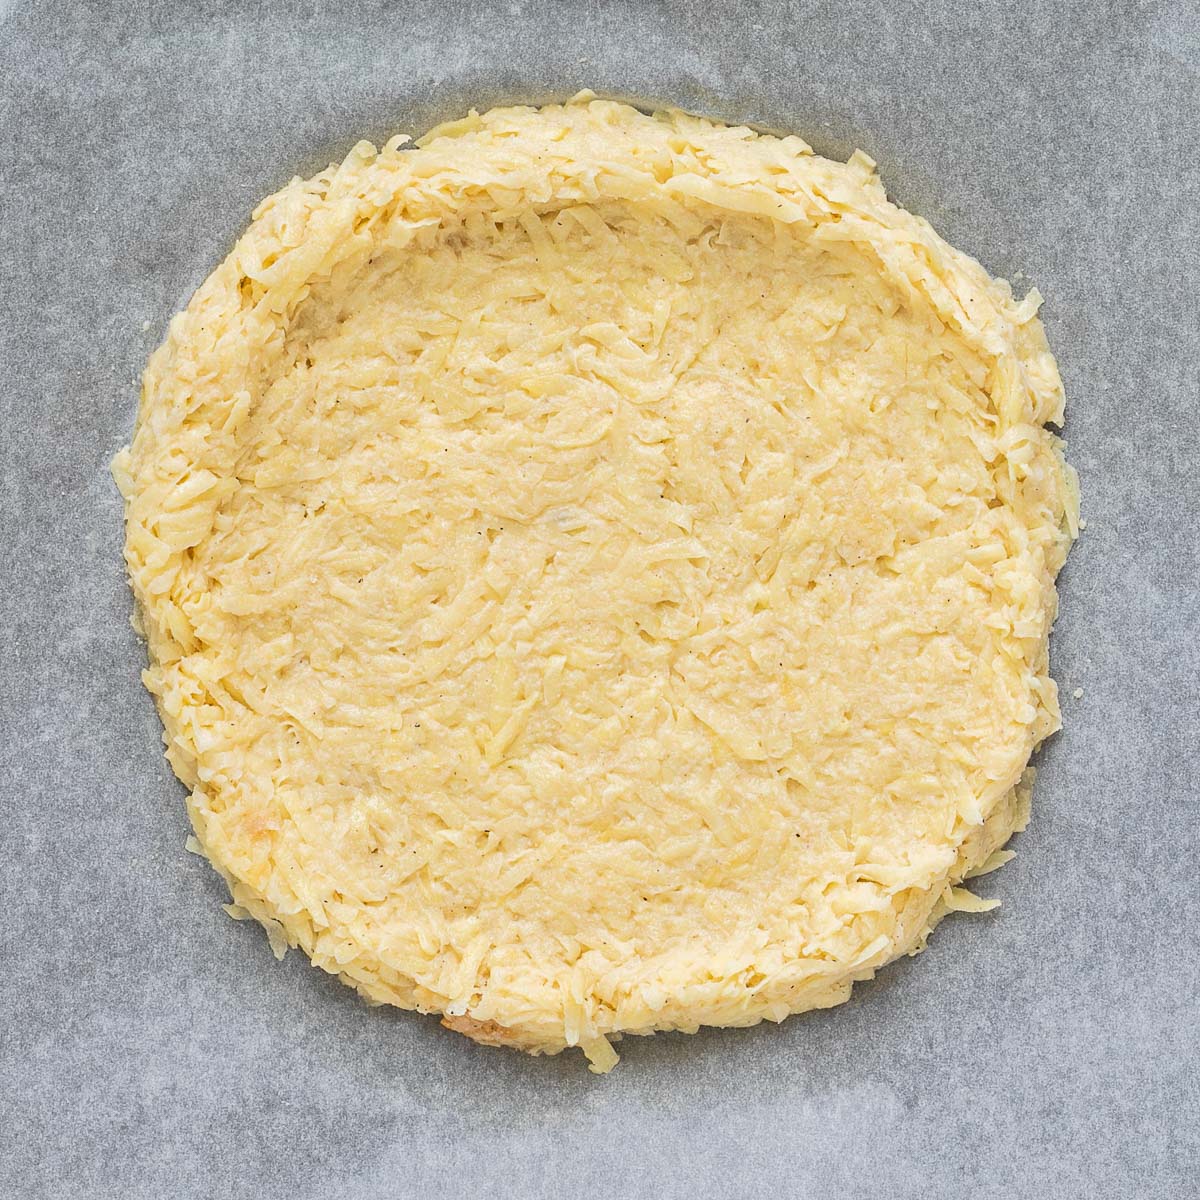 Shredded potato pizza crust on a pachment paper.